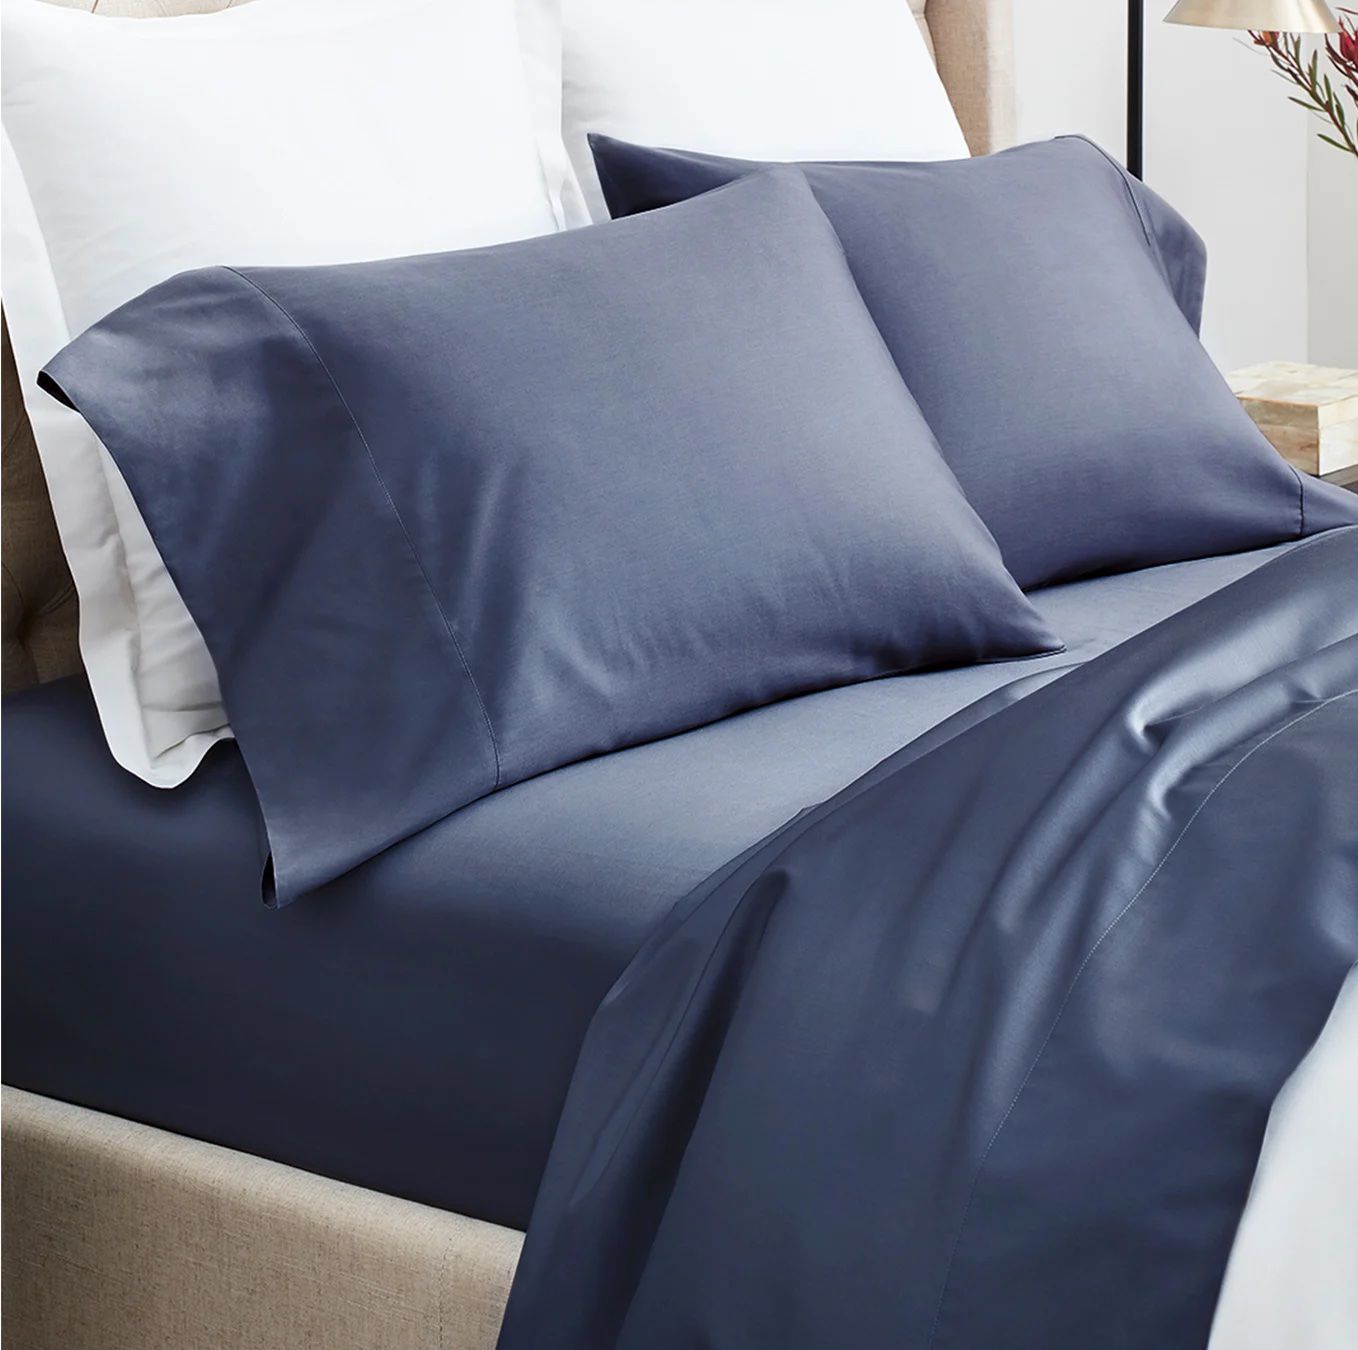 12 Best Cyber Monday Bedding Deals You Shouldn’t Sleep On